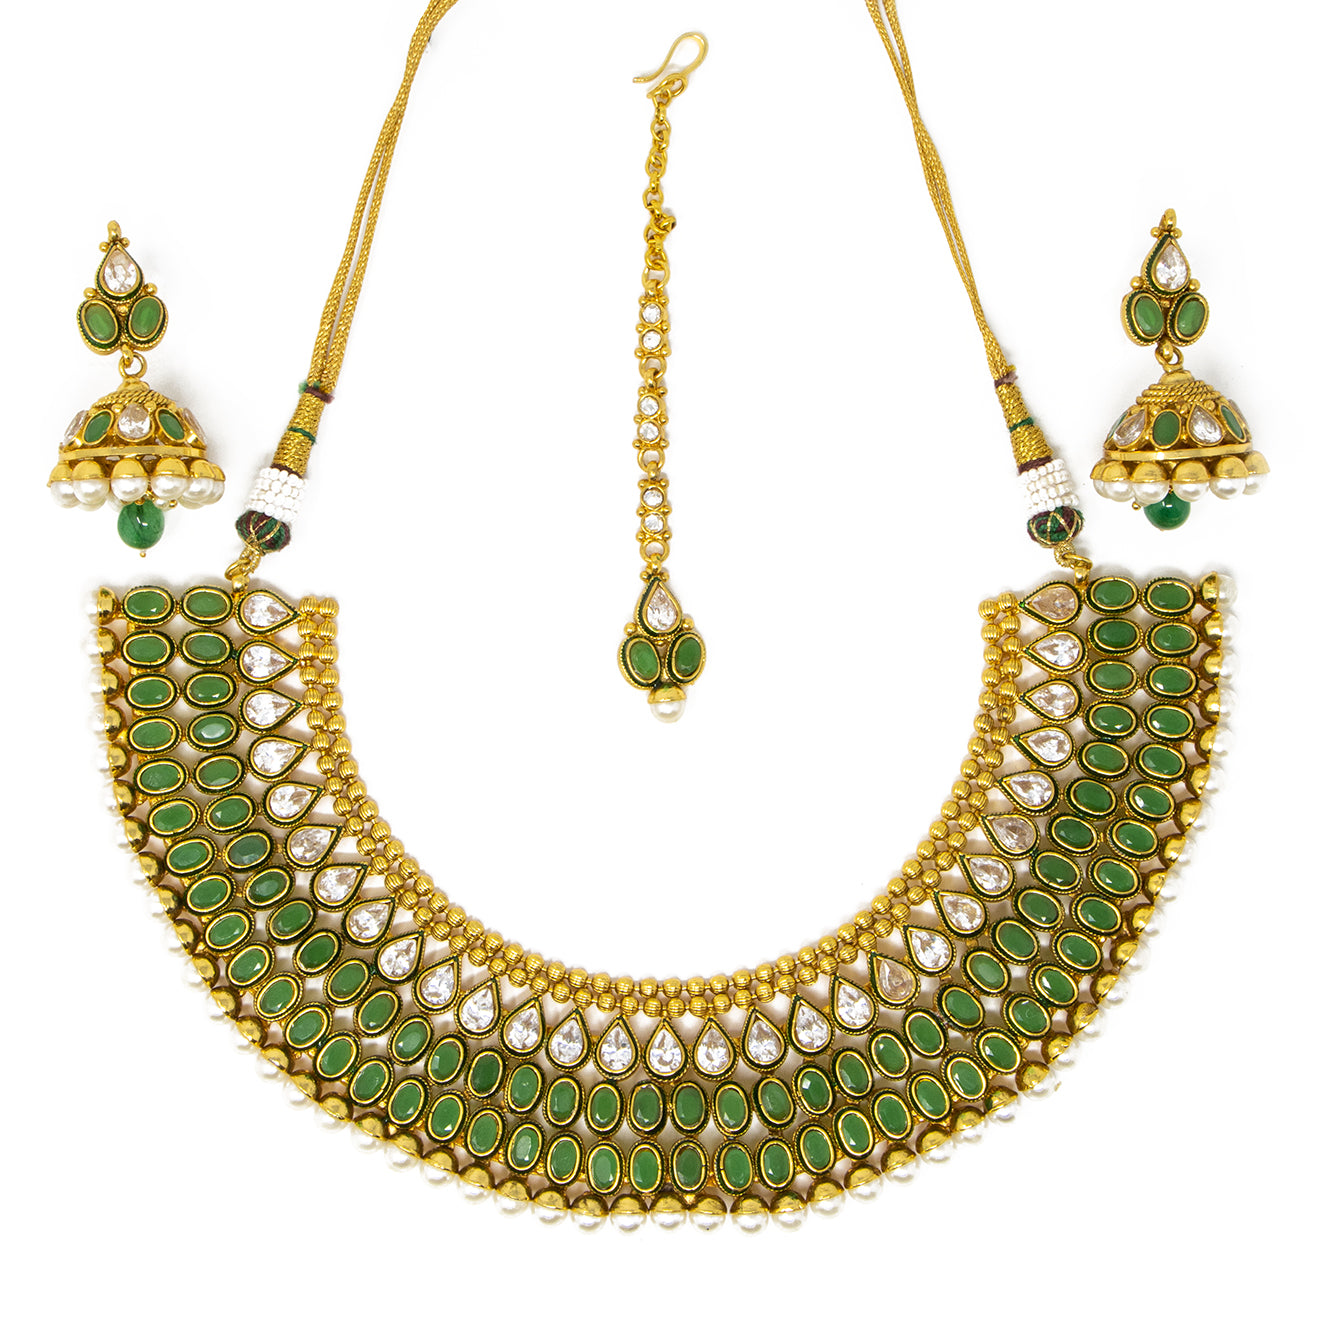 Gold and Green  3 piece set: Necklace with earrings and bindi (forehead piece)